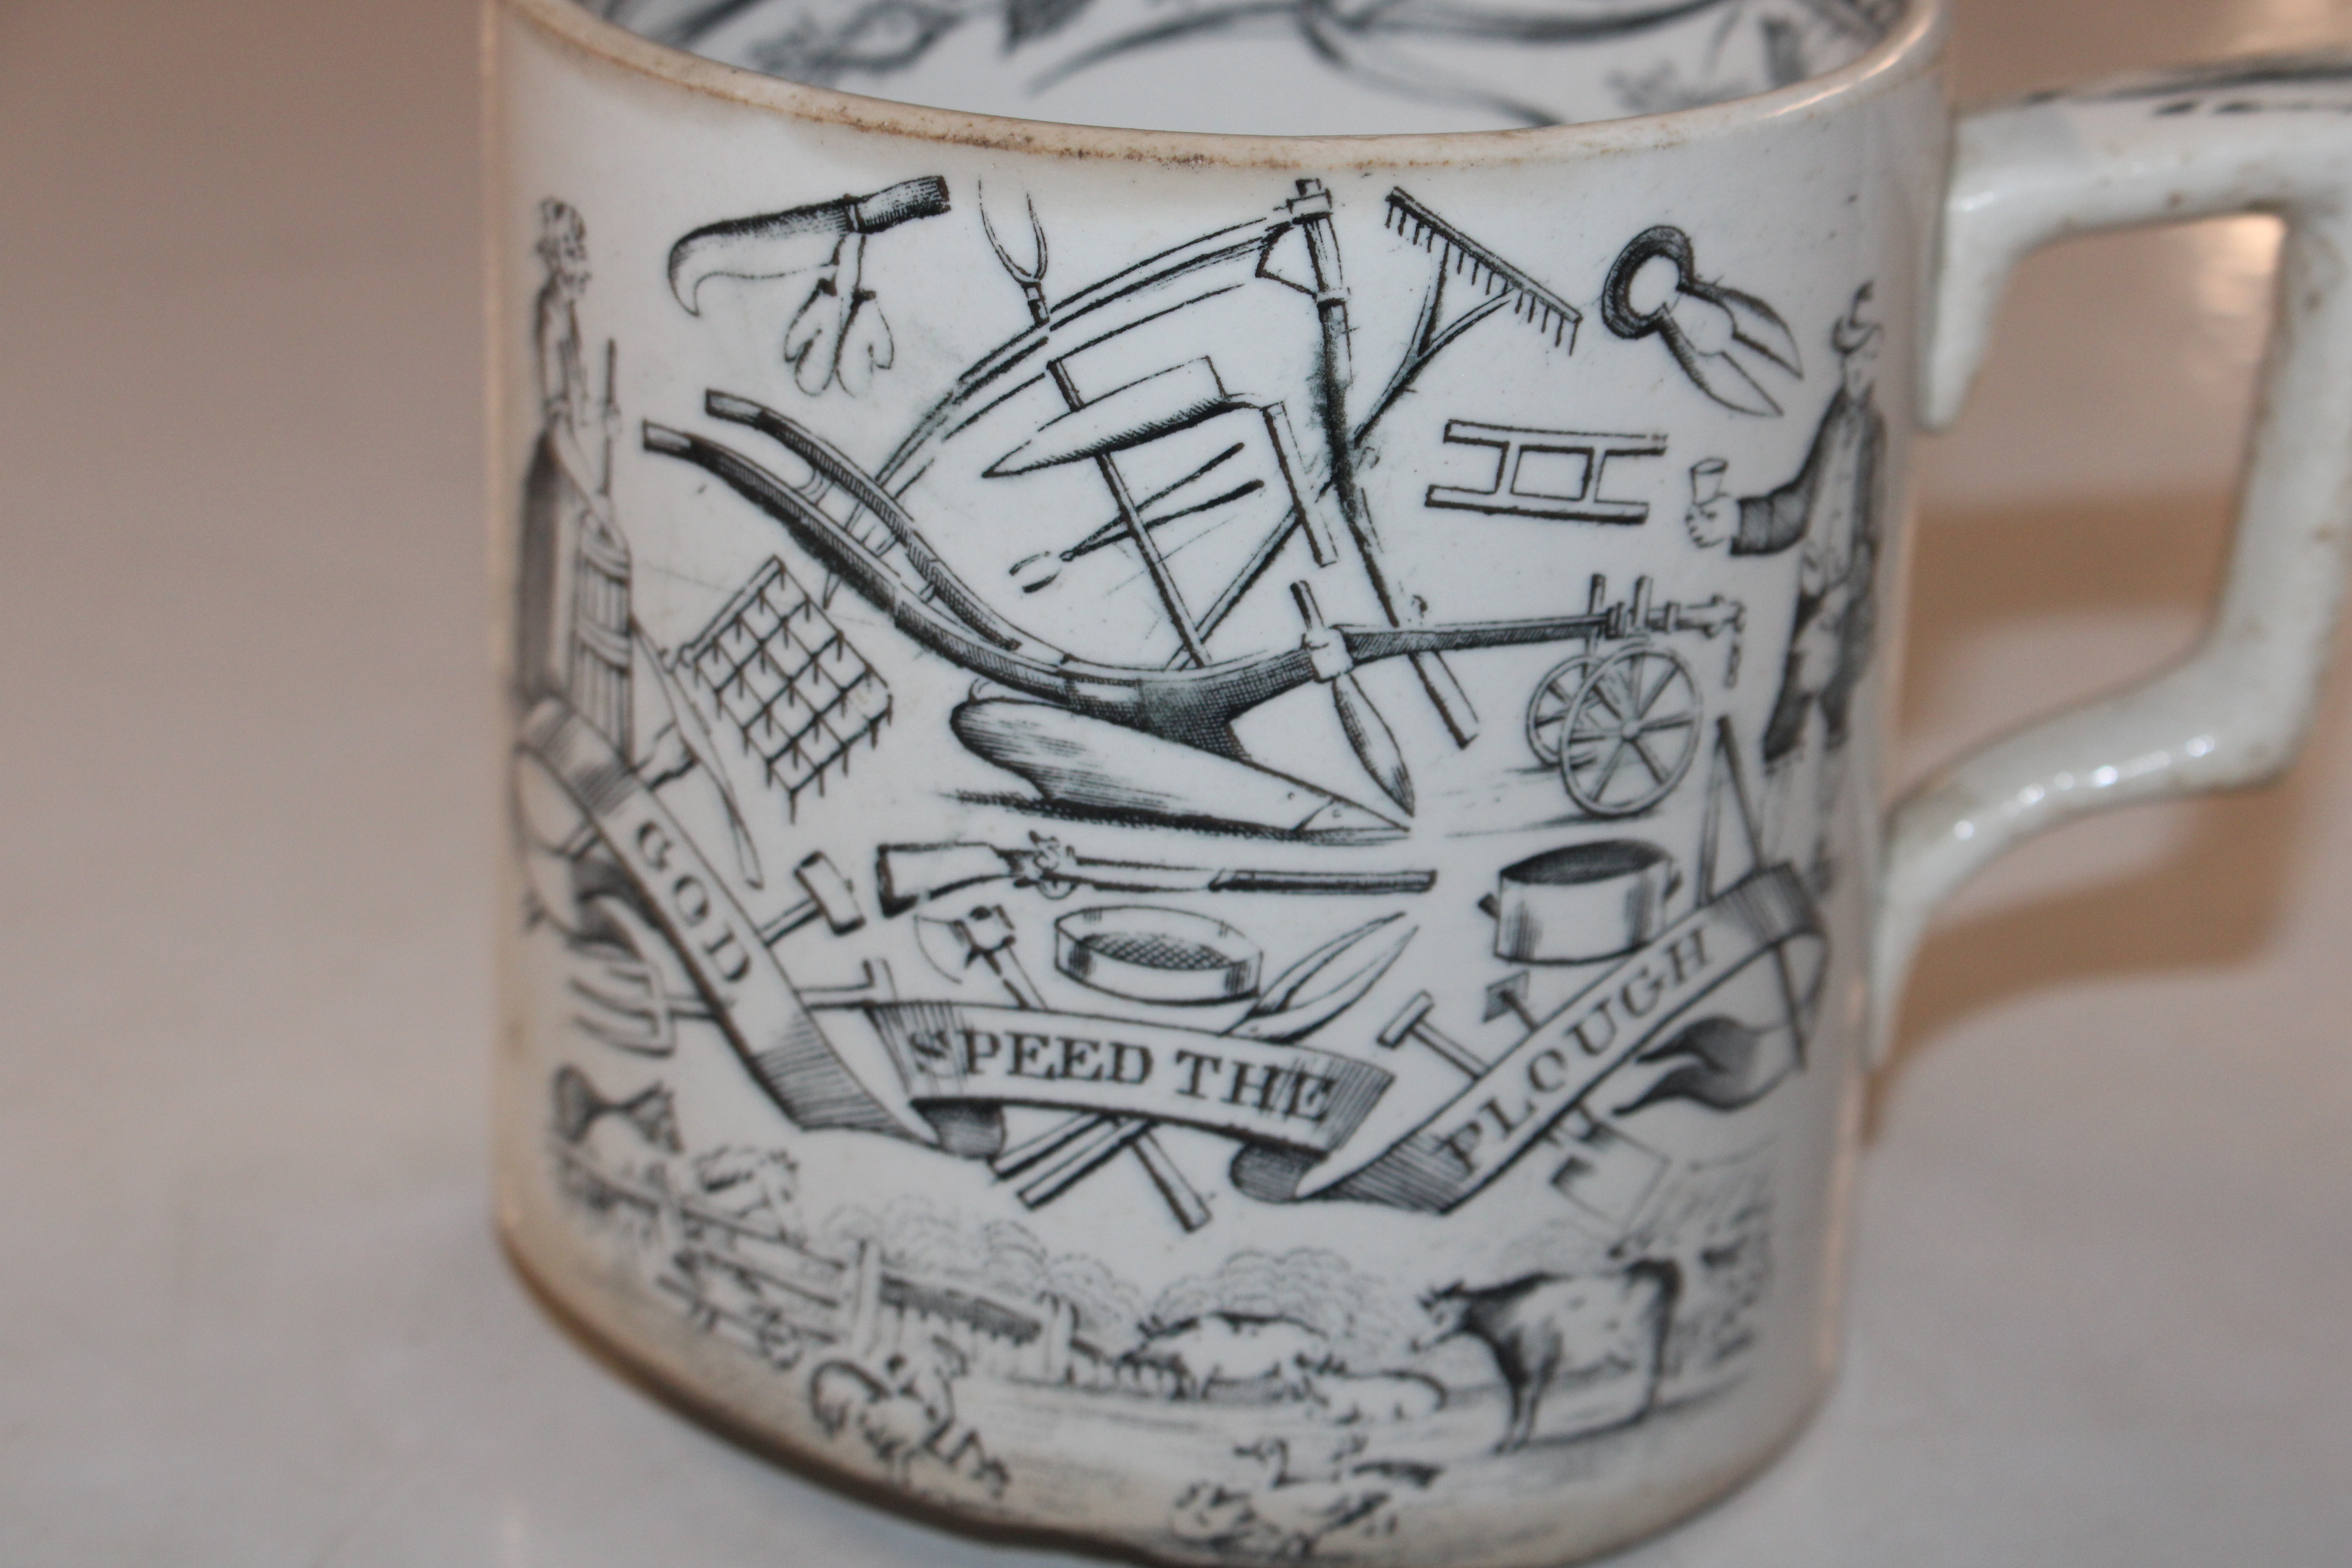 A Farmers Arms "God Speed The Plough" mug AF - Image 2 of 9